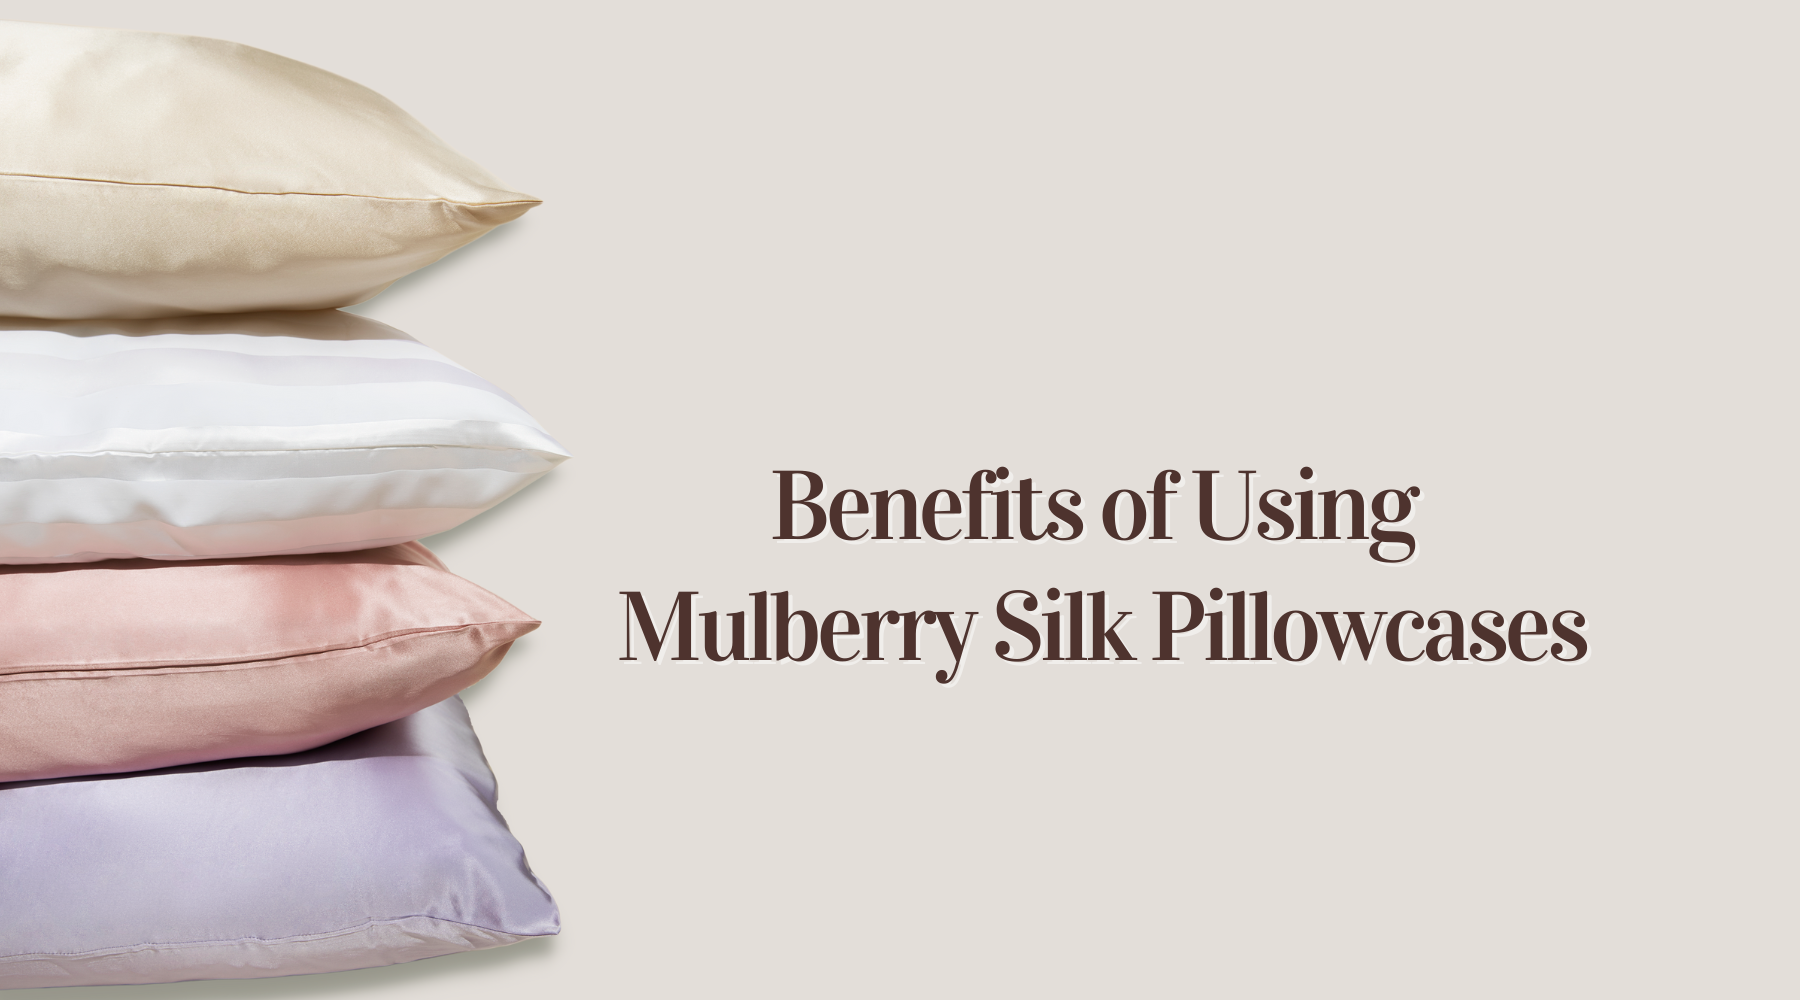 What are the benefits of using mulberry silk pillowcases?